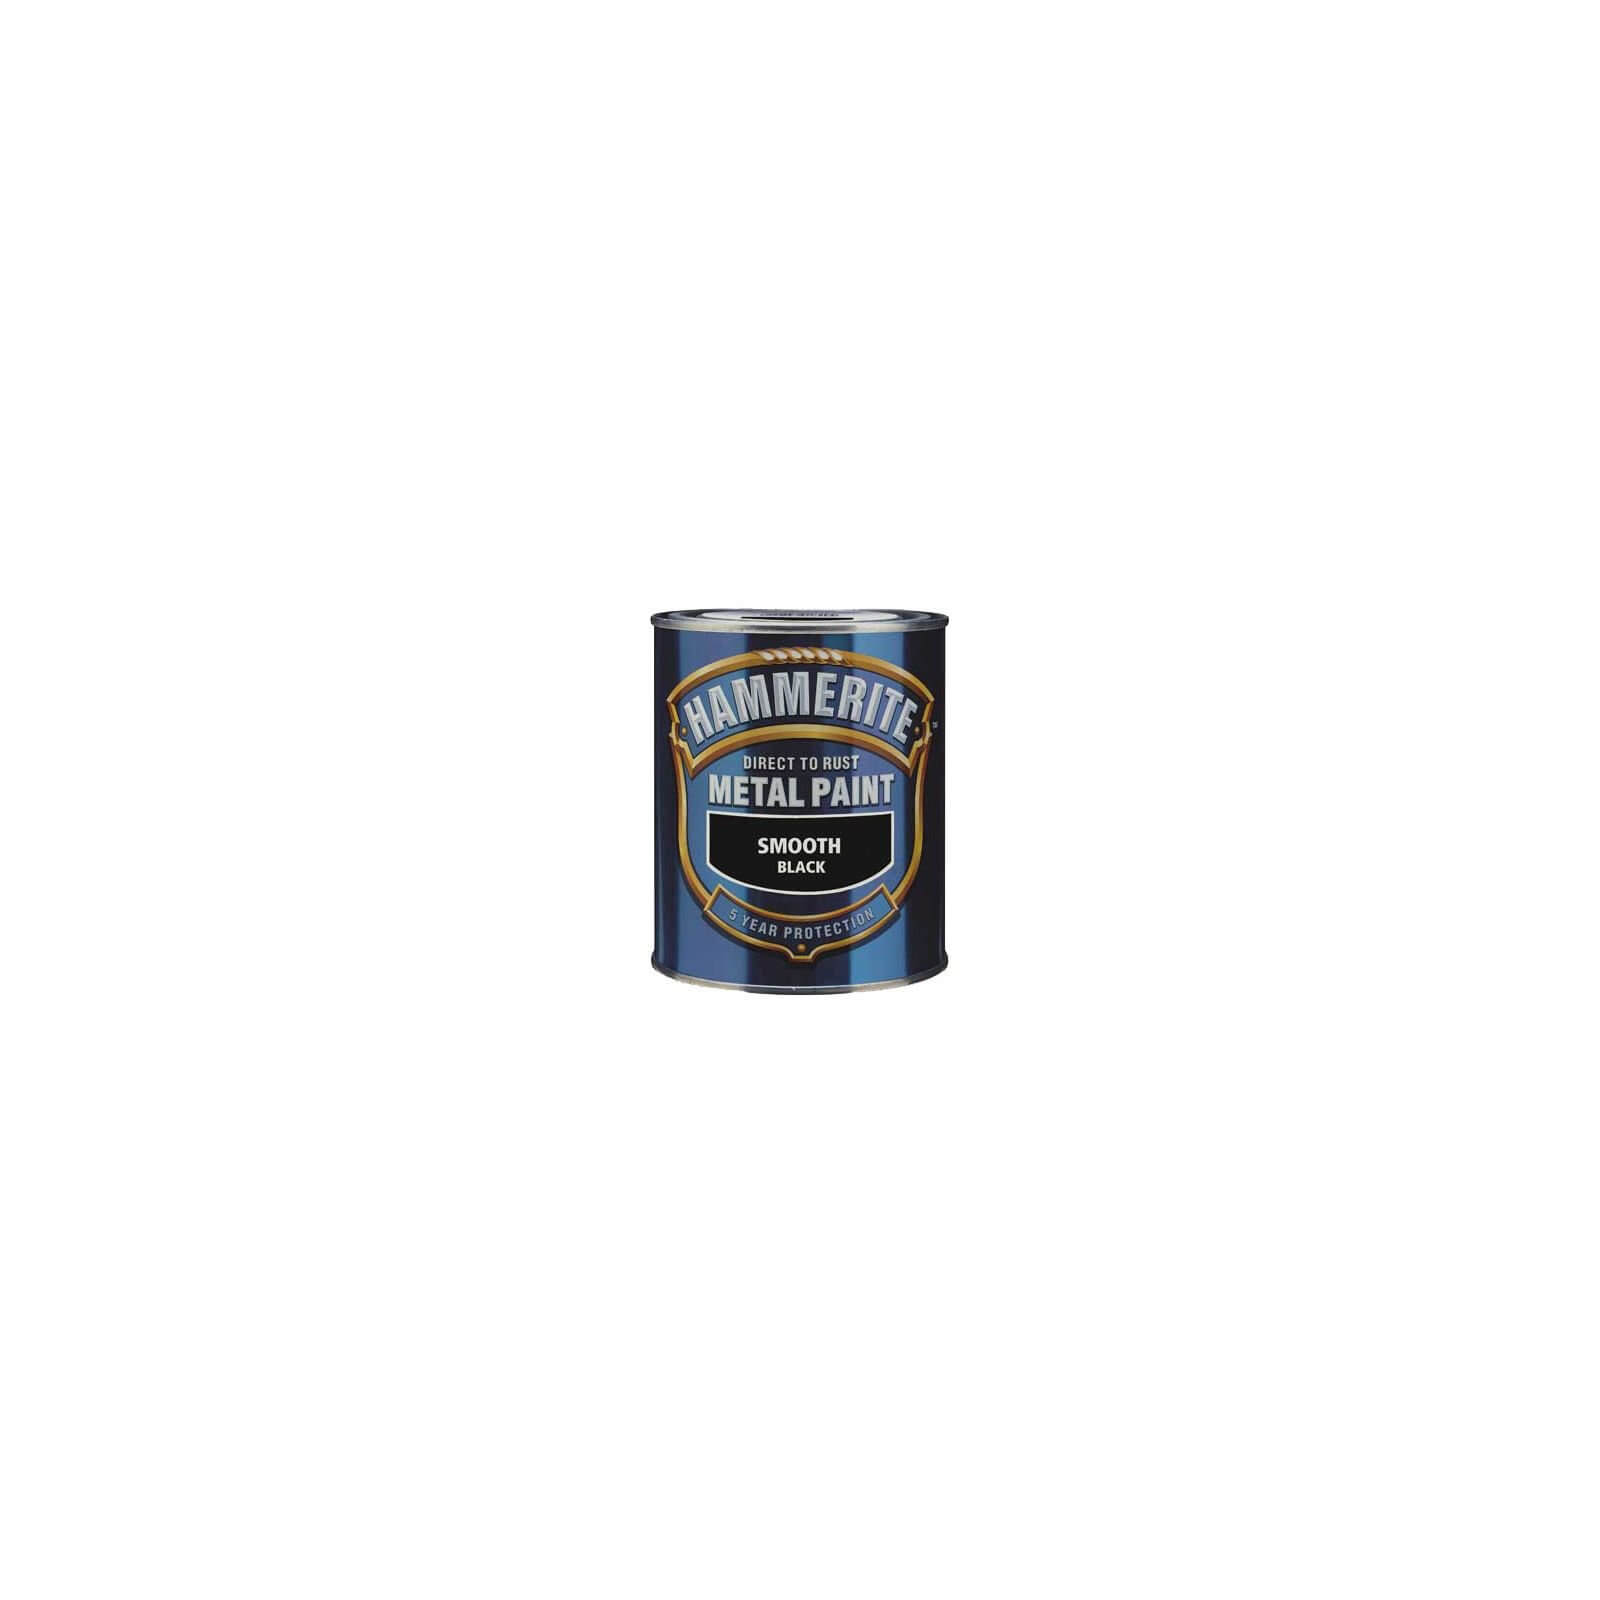 Hammerite Direct to Rust Metal Paint Smooth Black - 250ml